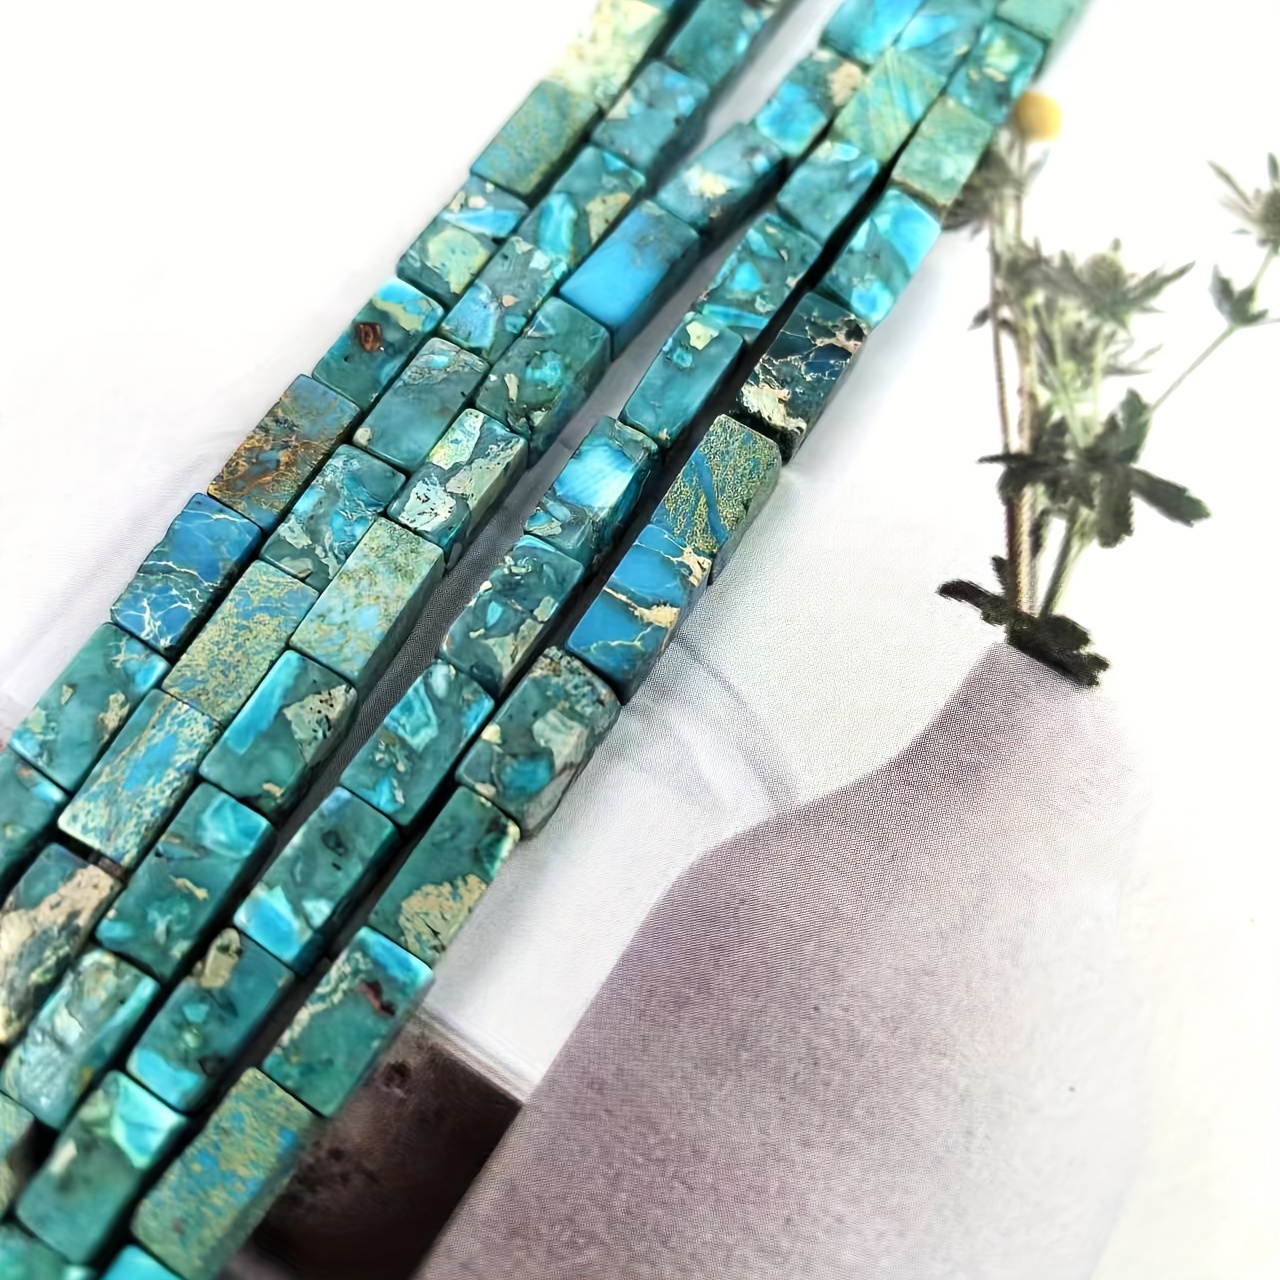 

1 String 20pcs Natural Emperor Pine Sky Blue Square Pillar Loose Beads Fashionable Handmade Diy Unique Special Bracelet Necklace, Sweater Chain Jewelry Making Craft Supplies